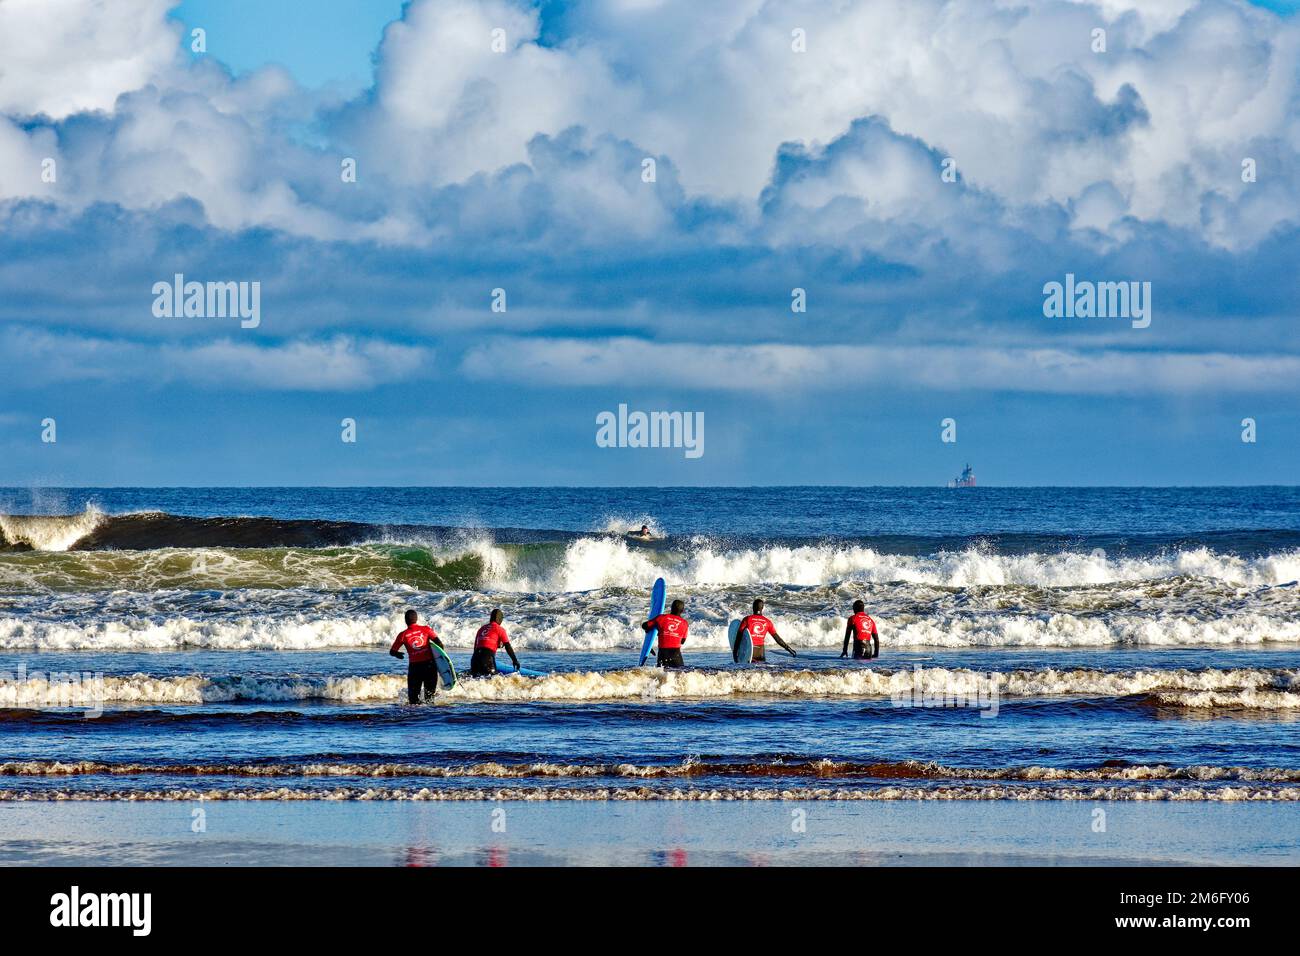 Lossiemouth East Beach Moray coast Scotland five surfers from the New Wave Surf School heading into the sea and breaking waves Stock Photo